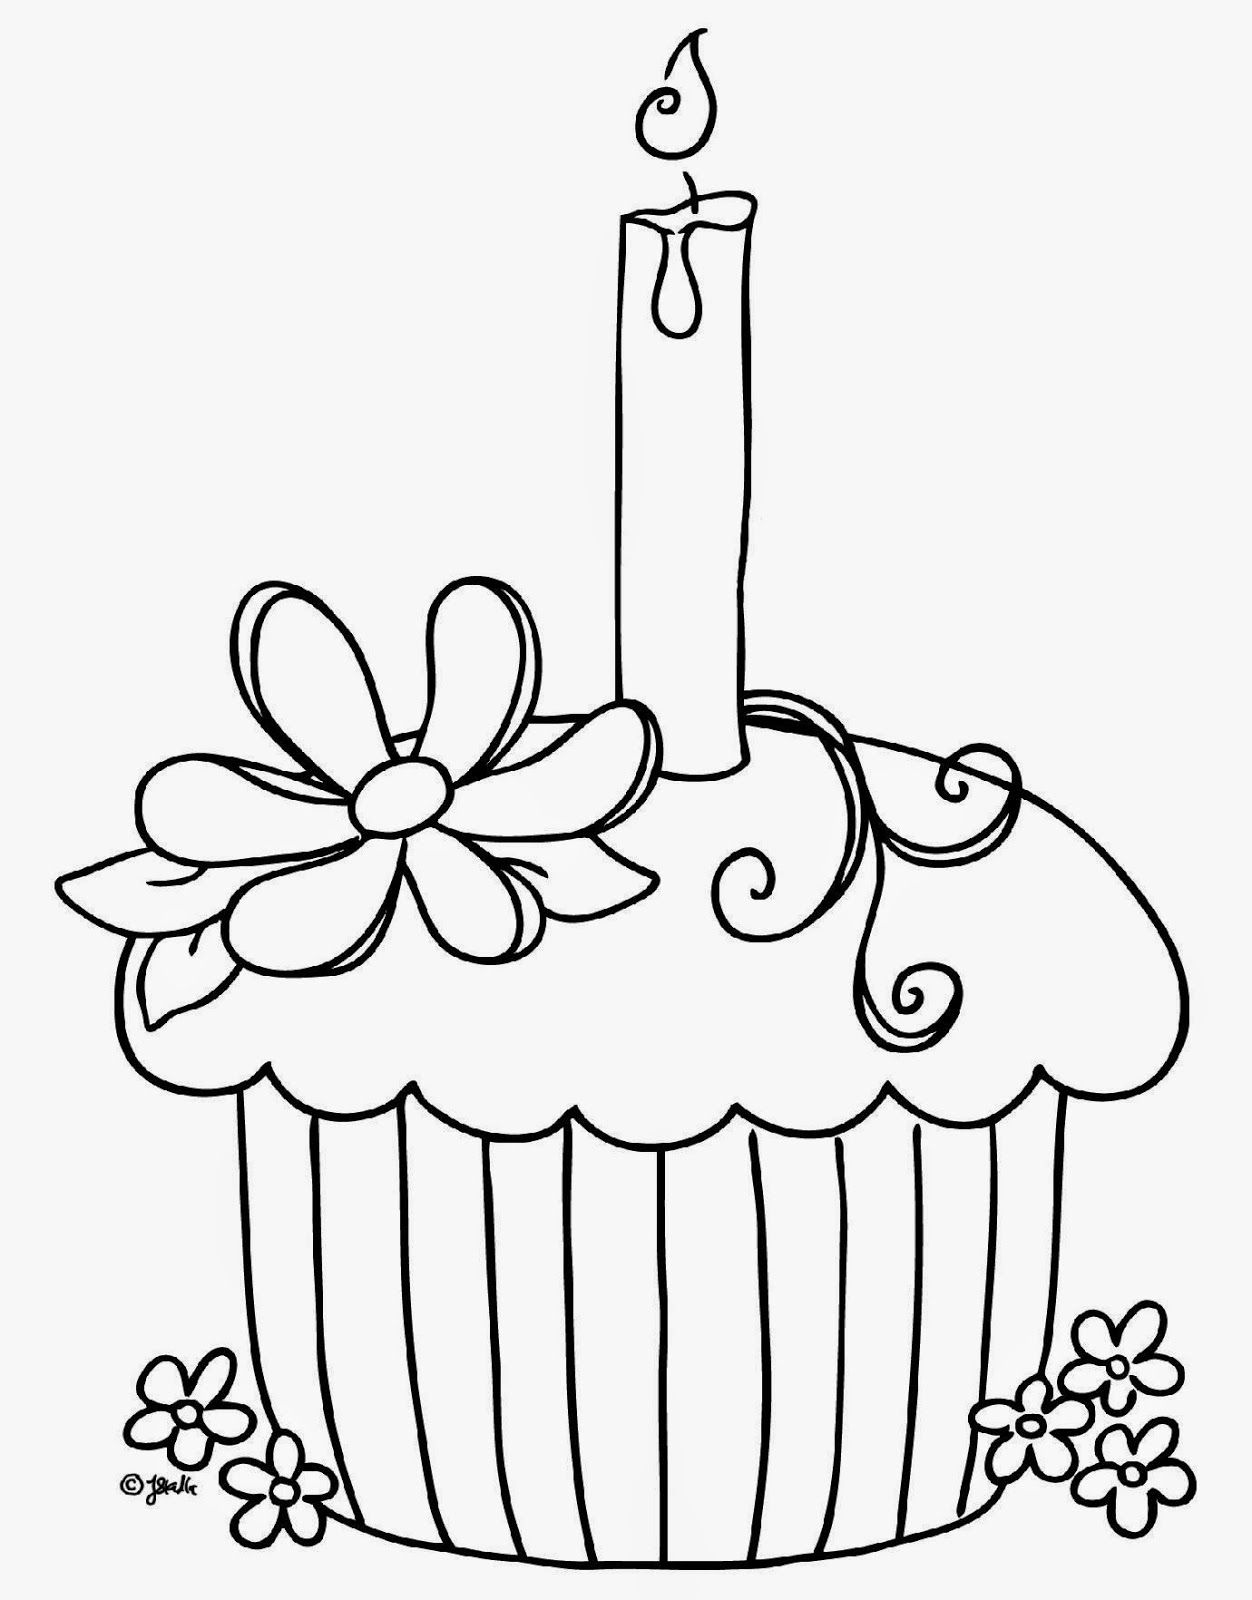 Breast Cancer Ribbon Coloring Pages for